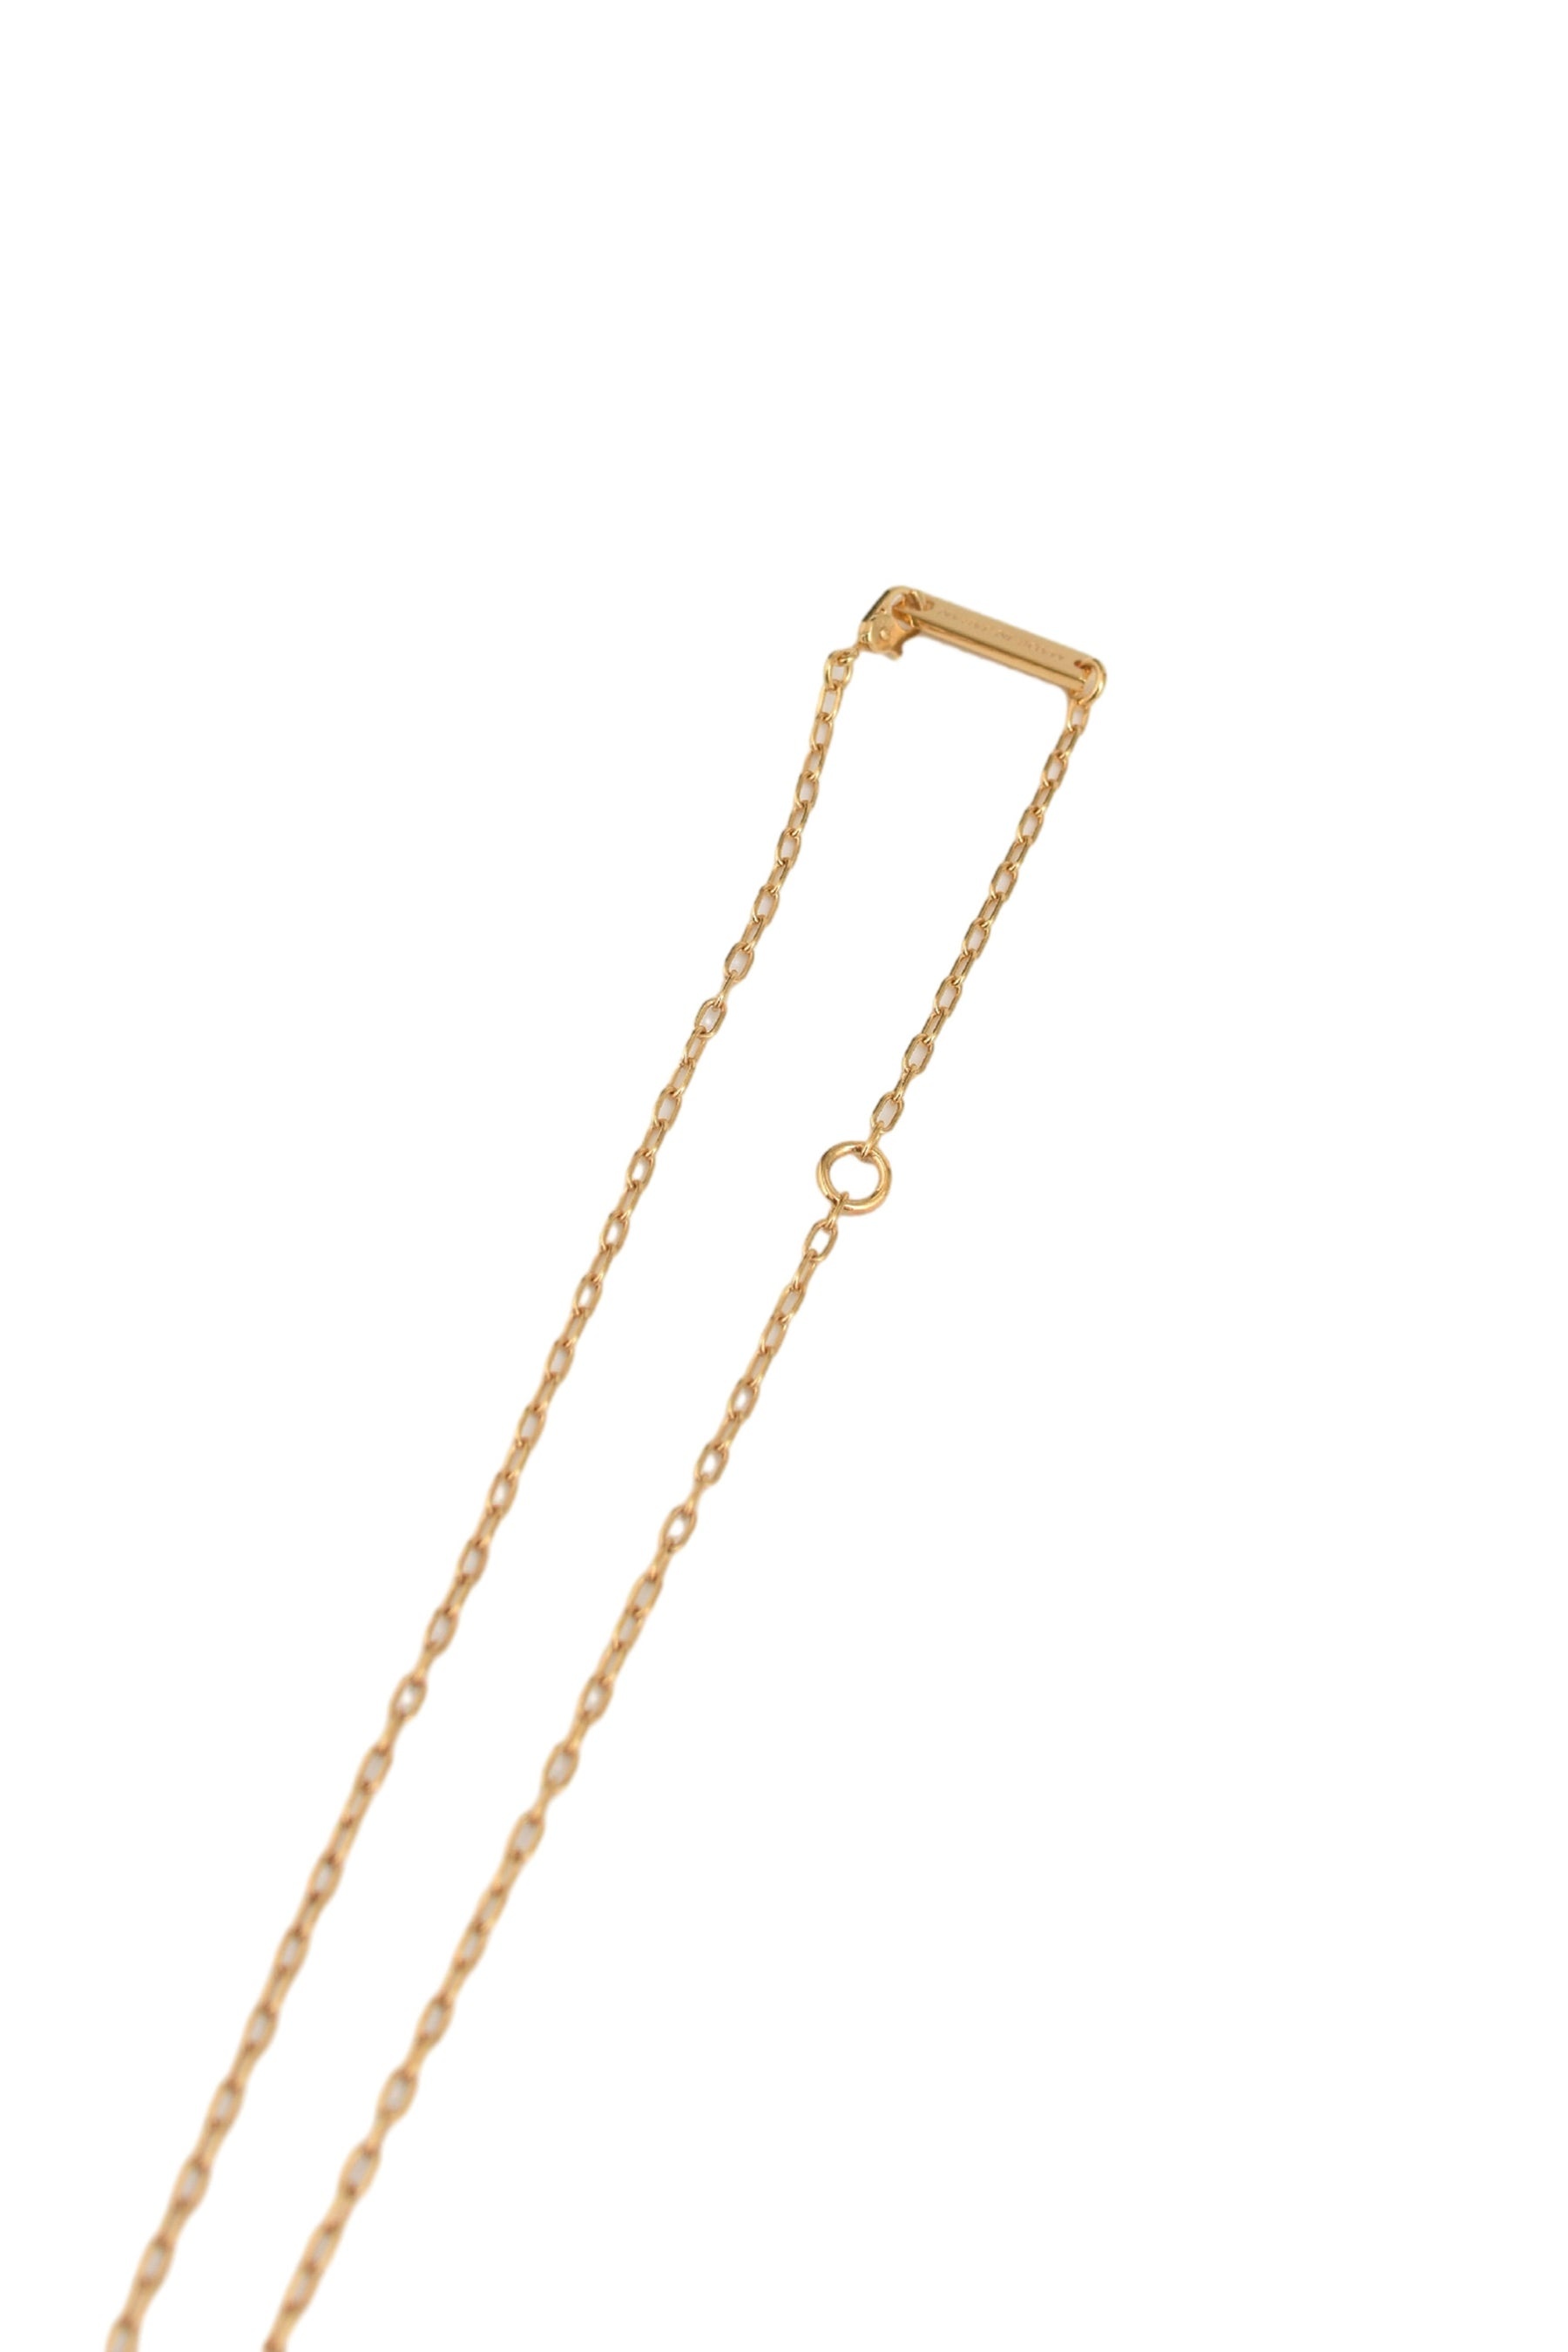 ROSE CHARM NECKLACE / GOLD - 5